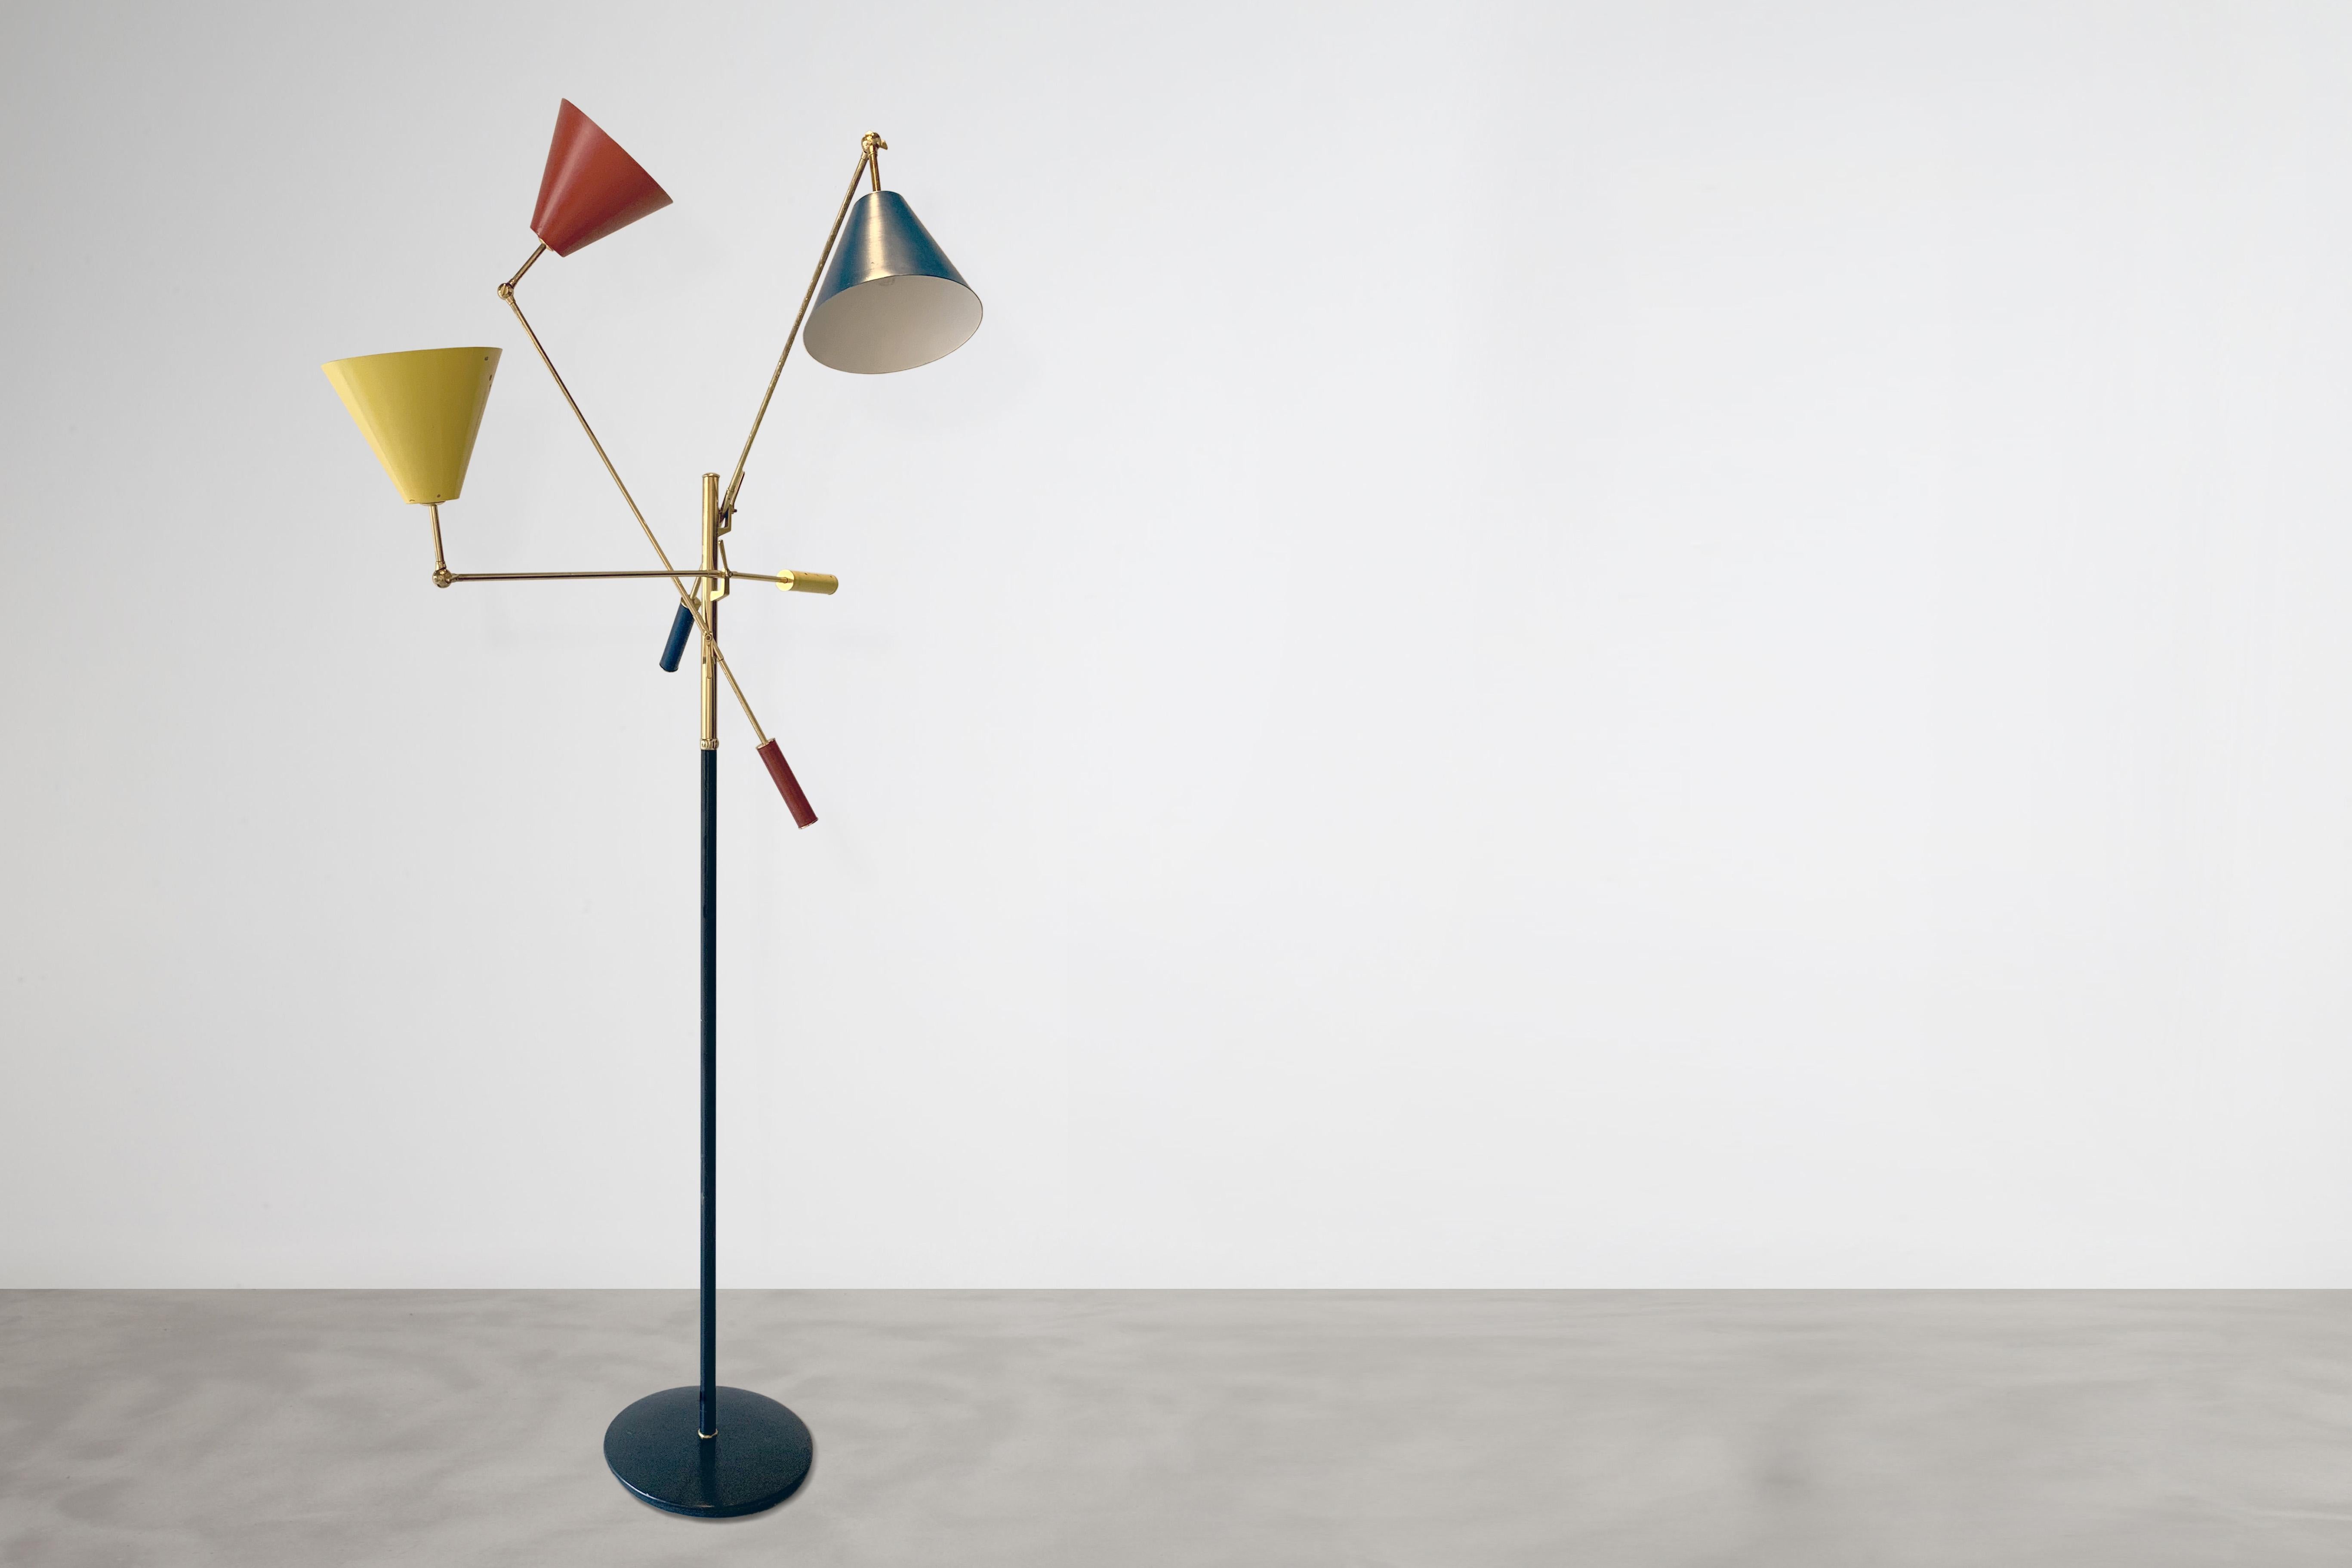 Iconic floor lamp designed by Angelo Lelii and produced by Arredoluce.
Marked under the cast iron base ”Arredoluce Monza - Italy”, this round base version was selected by Achille Castiglioni in 1951 for the IX Triennale exhibition in Milan.